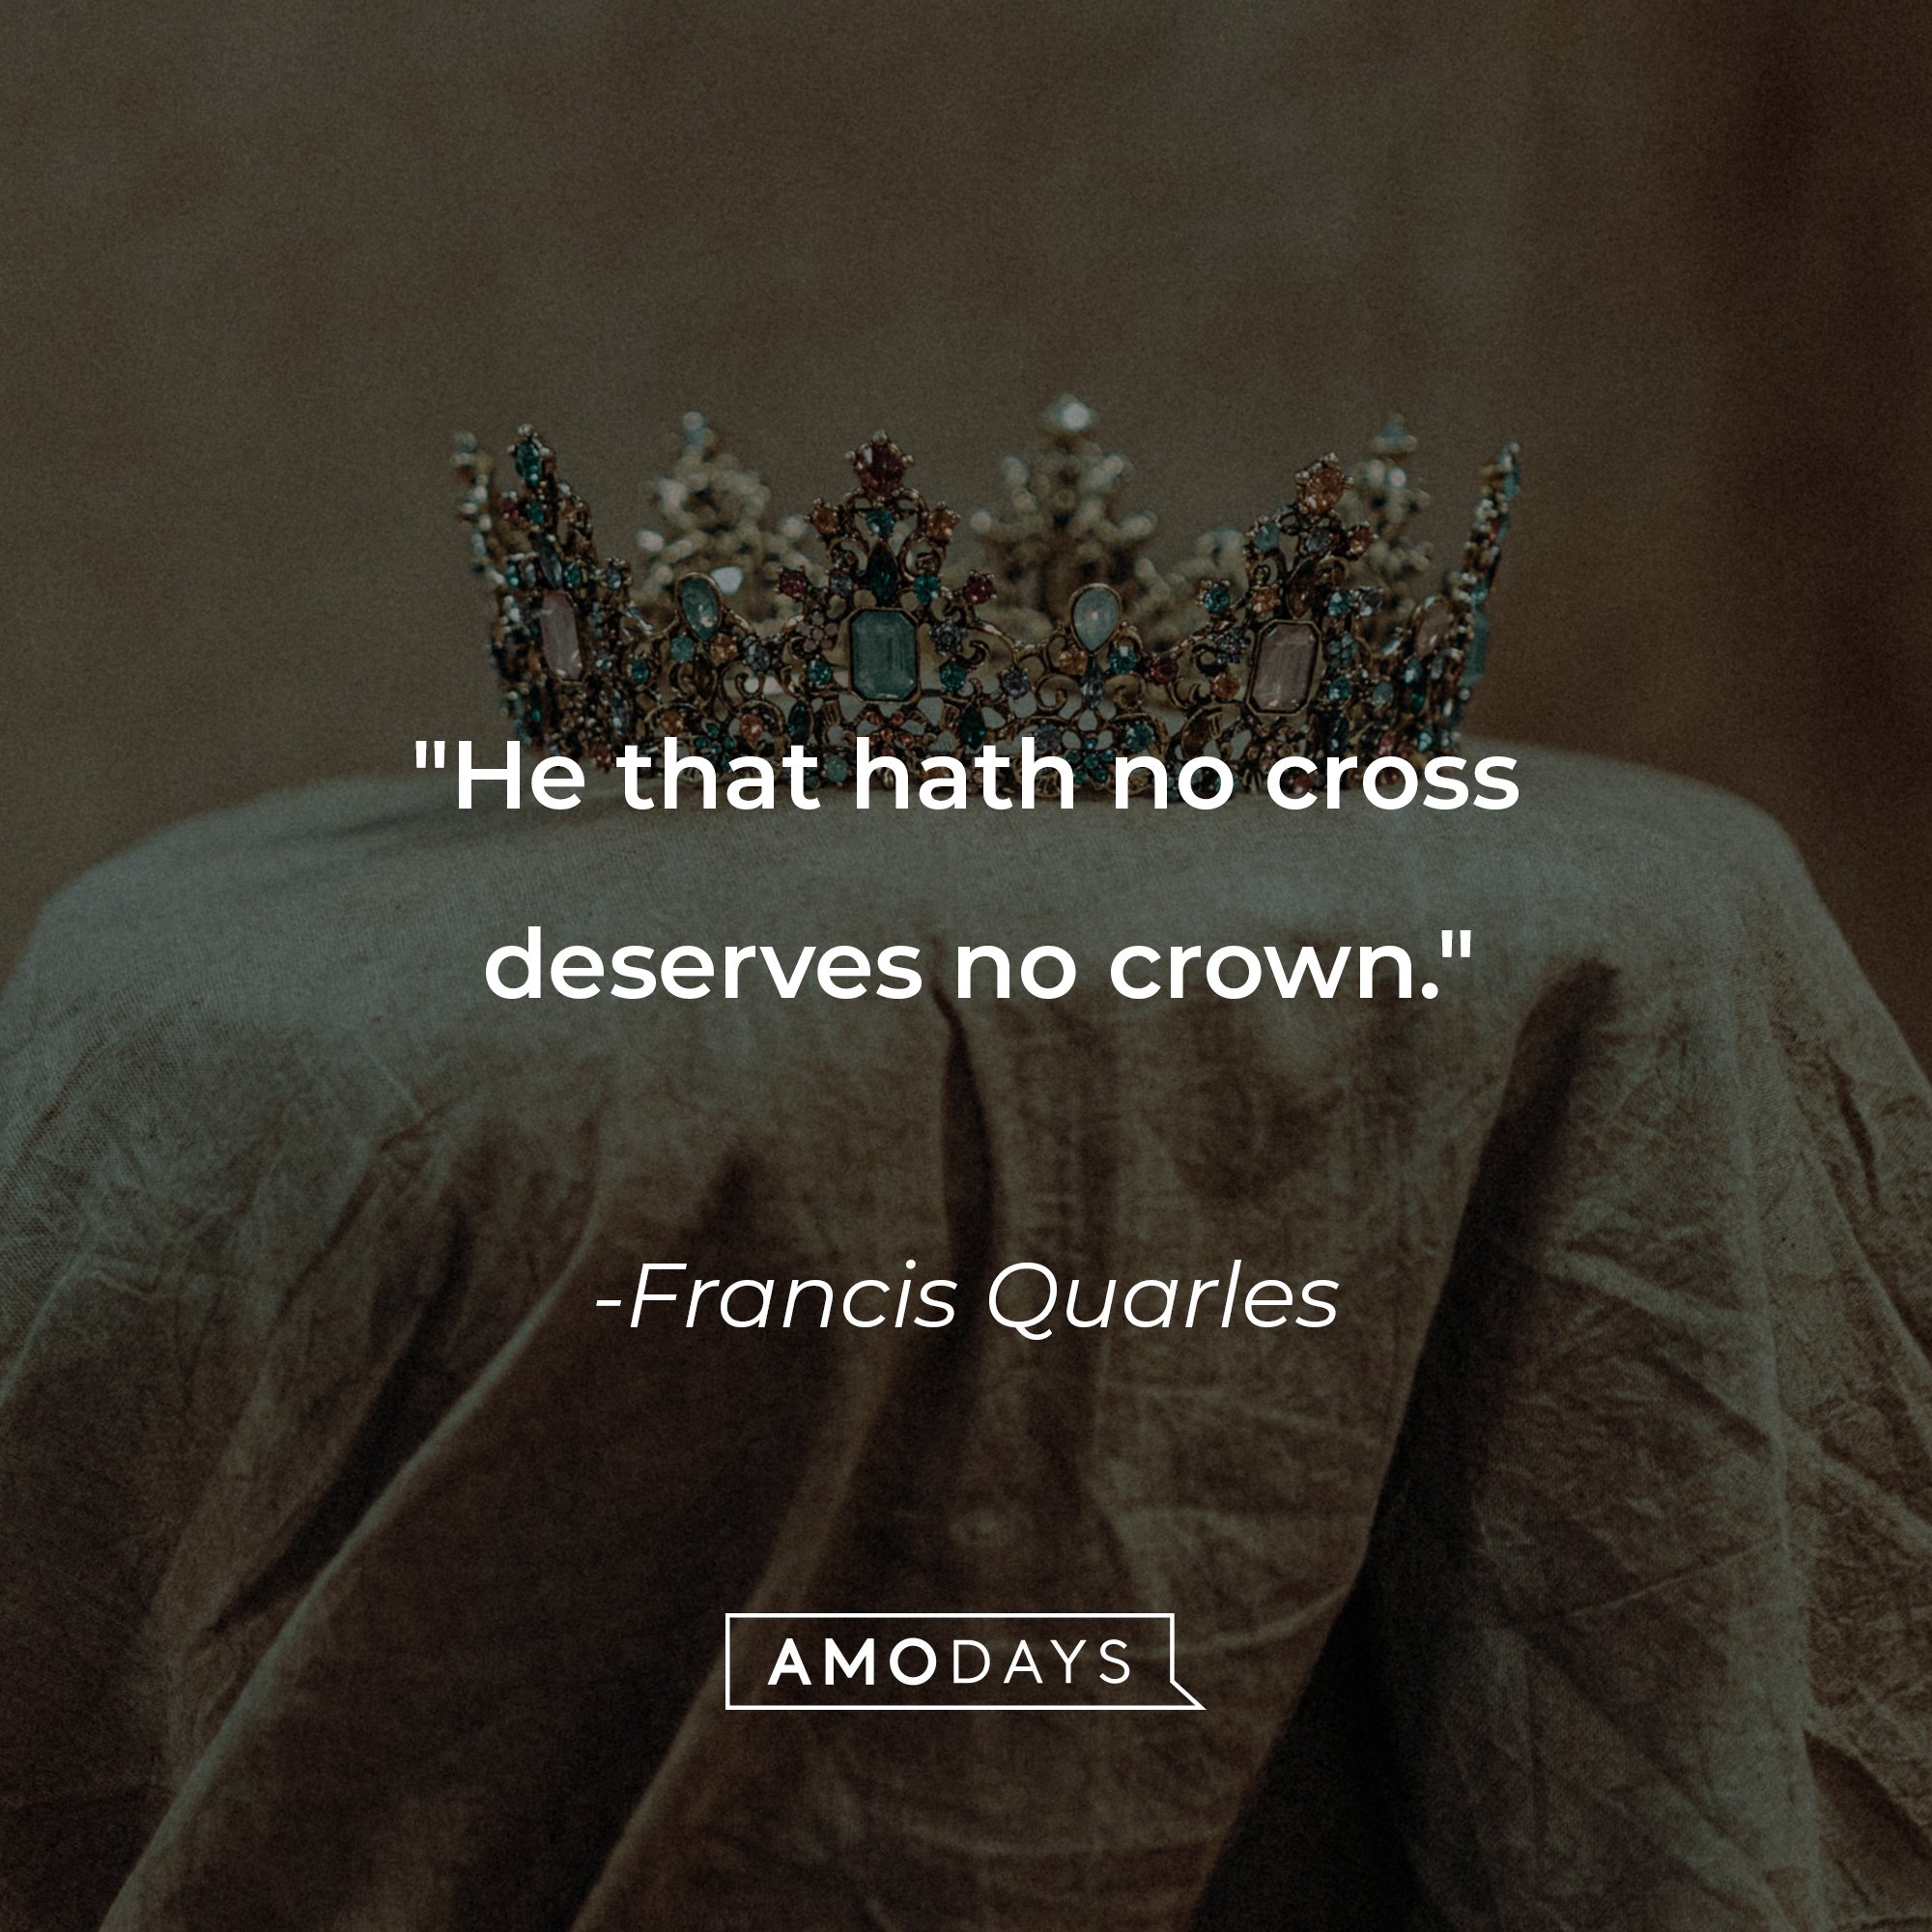 Francis Quarles' quote: "He that hath no cross deserves no crown." | Image: AmoDays